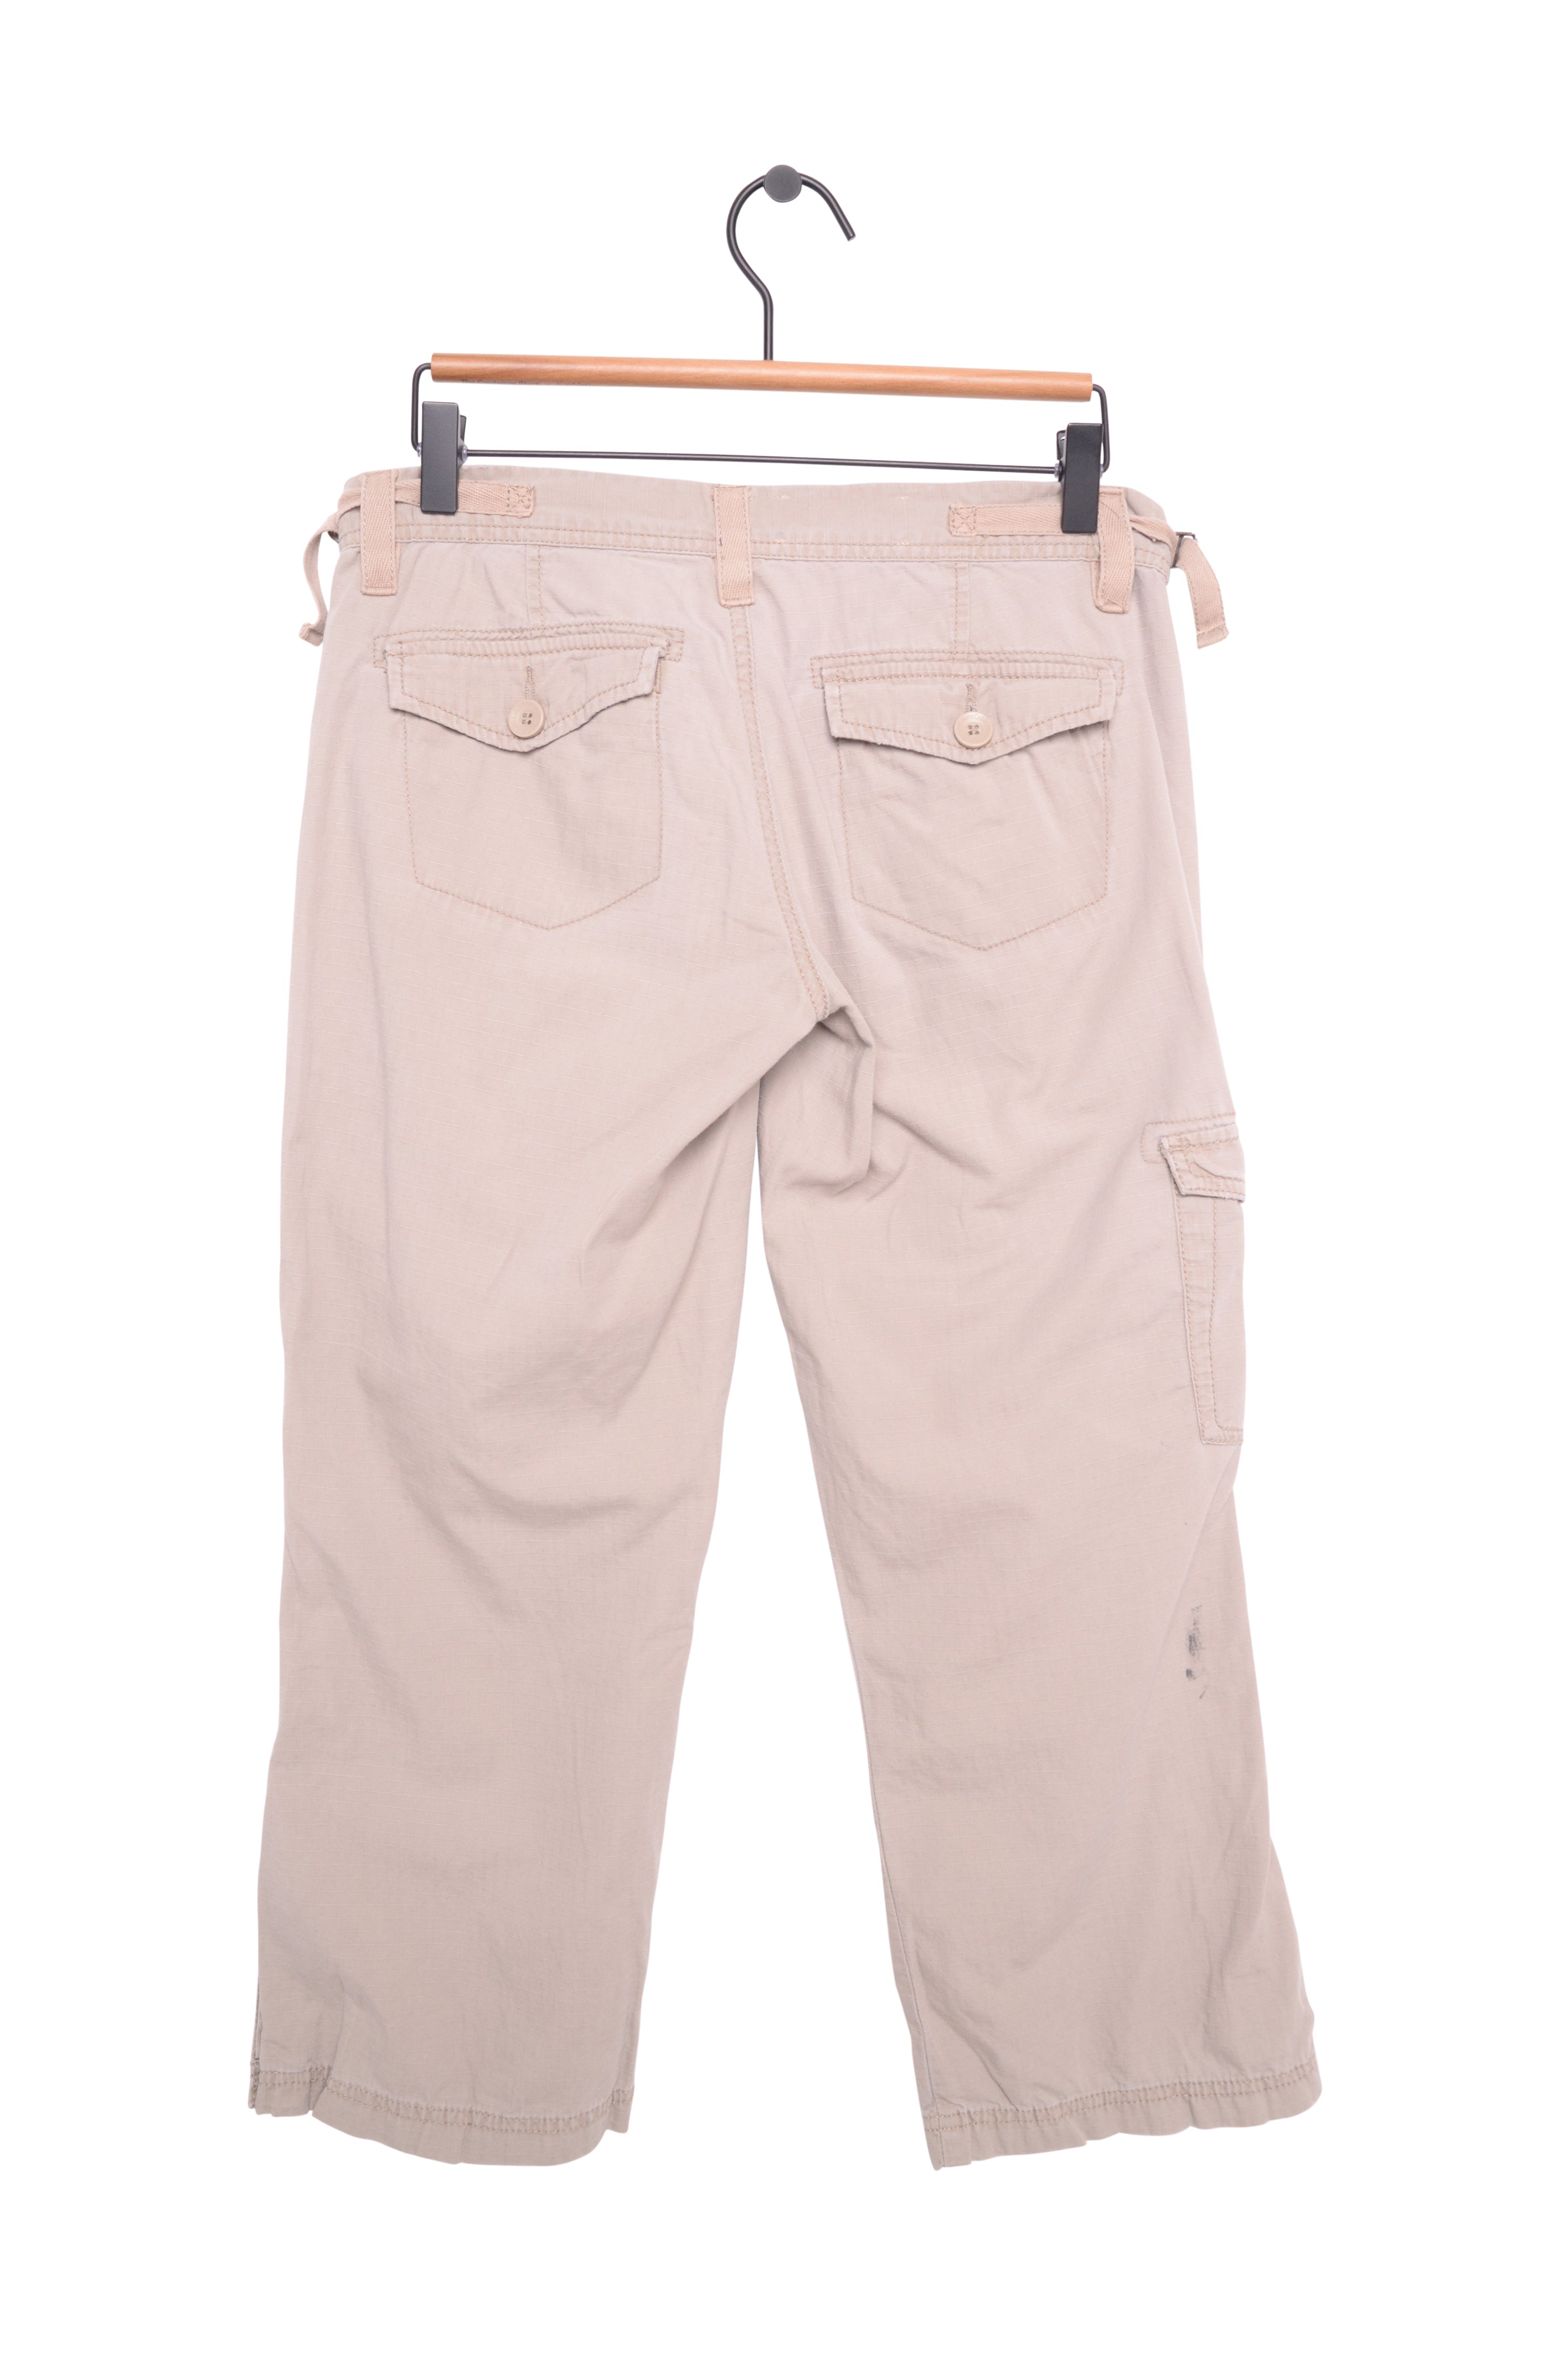 Y2K Calvin Klein Cargo Pants Free Shipping - The Vintage Twin